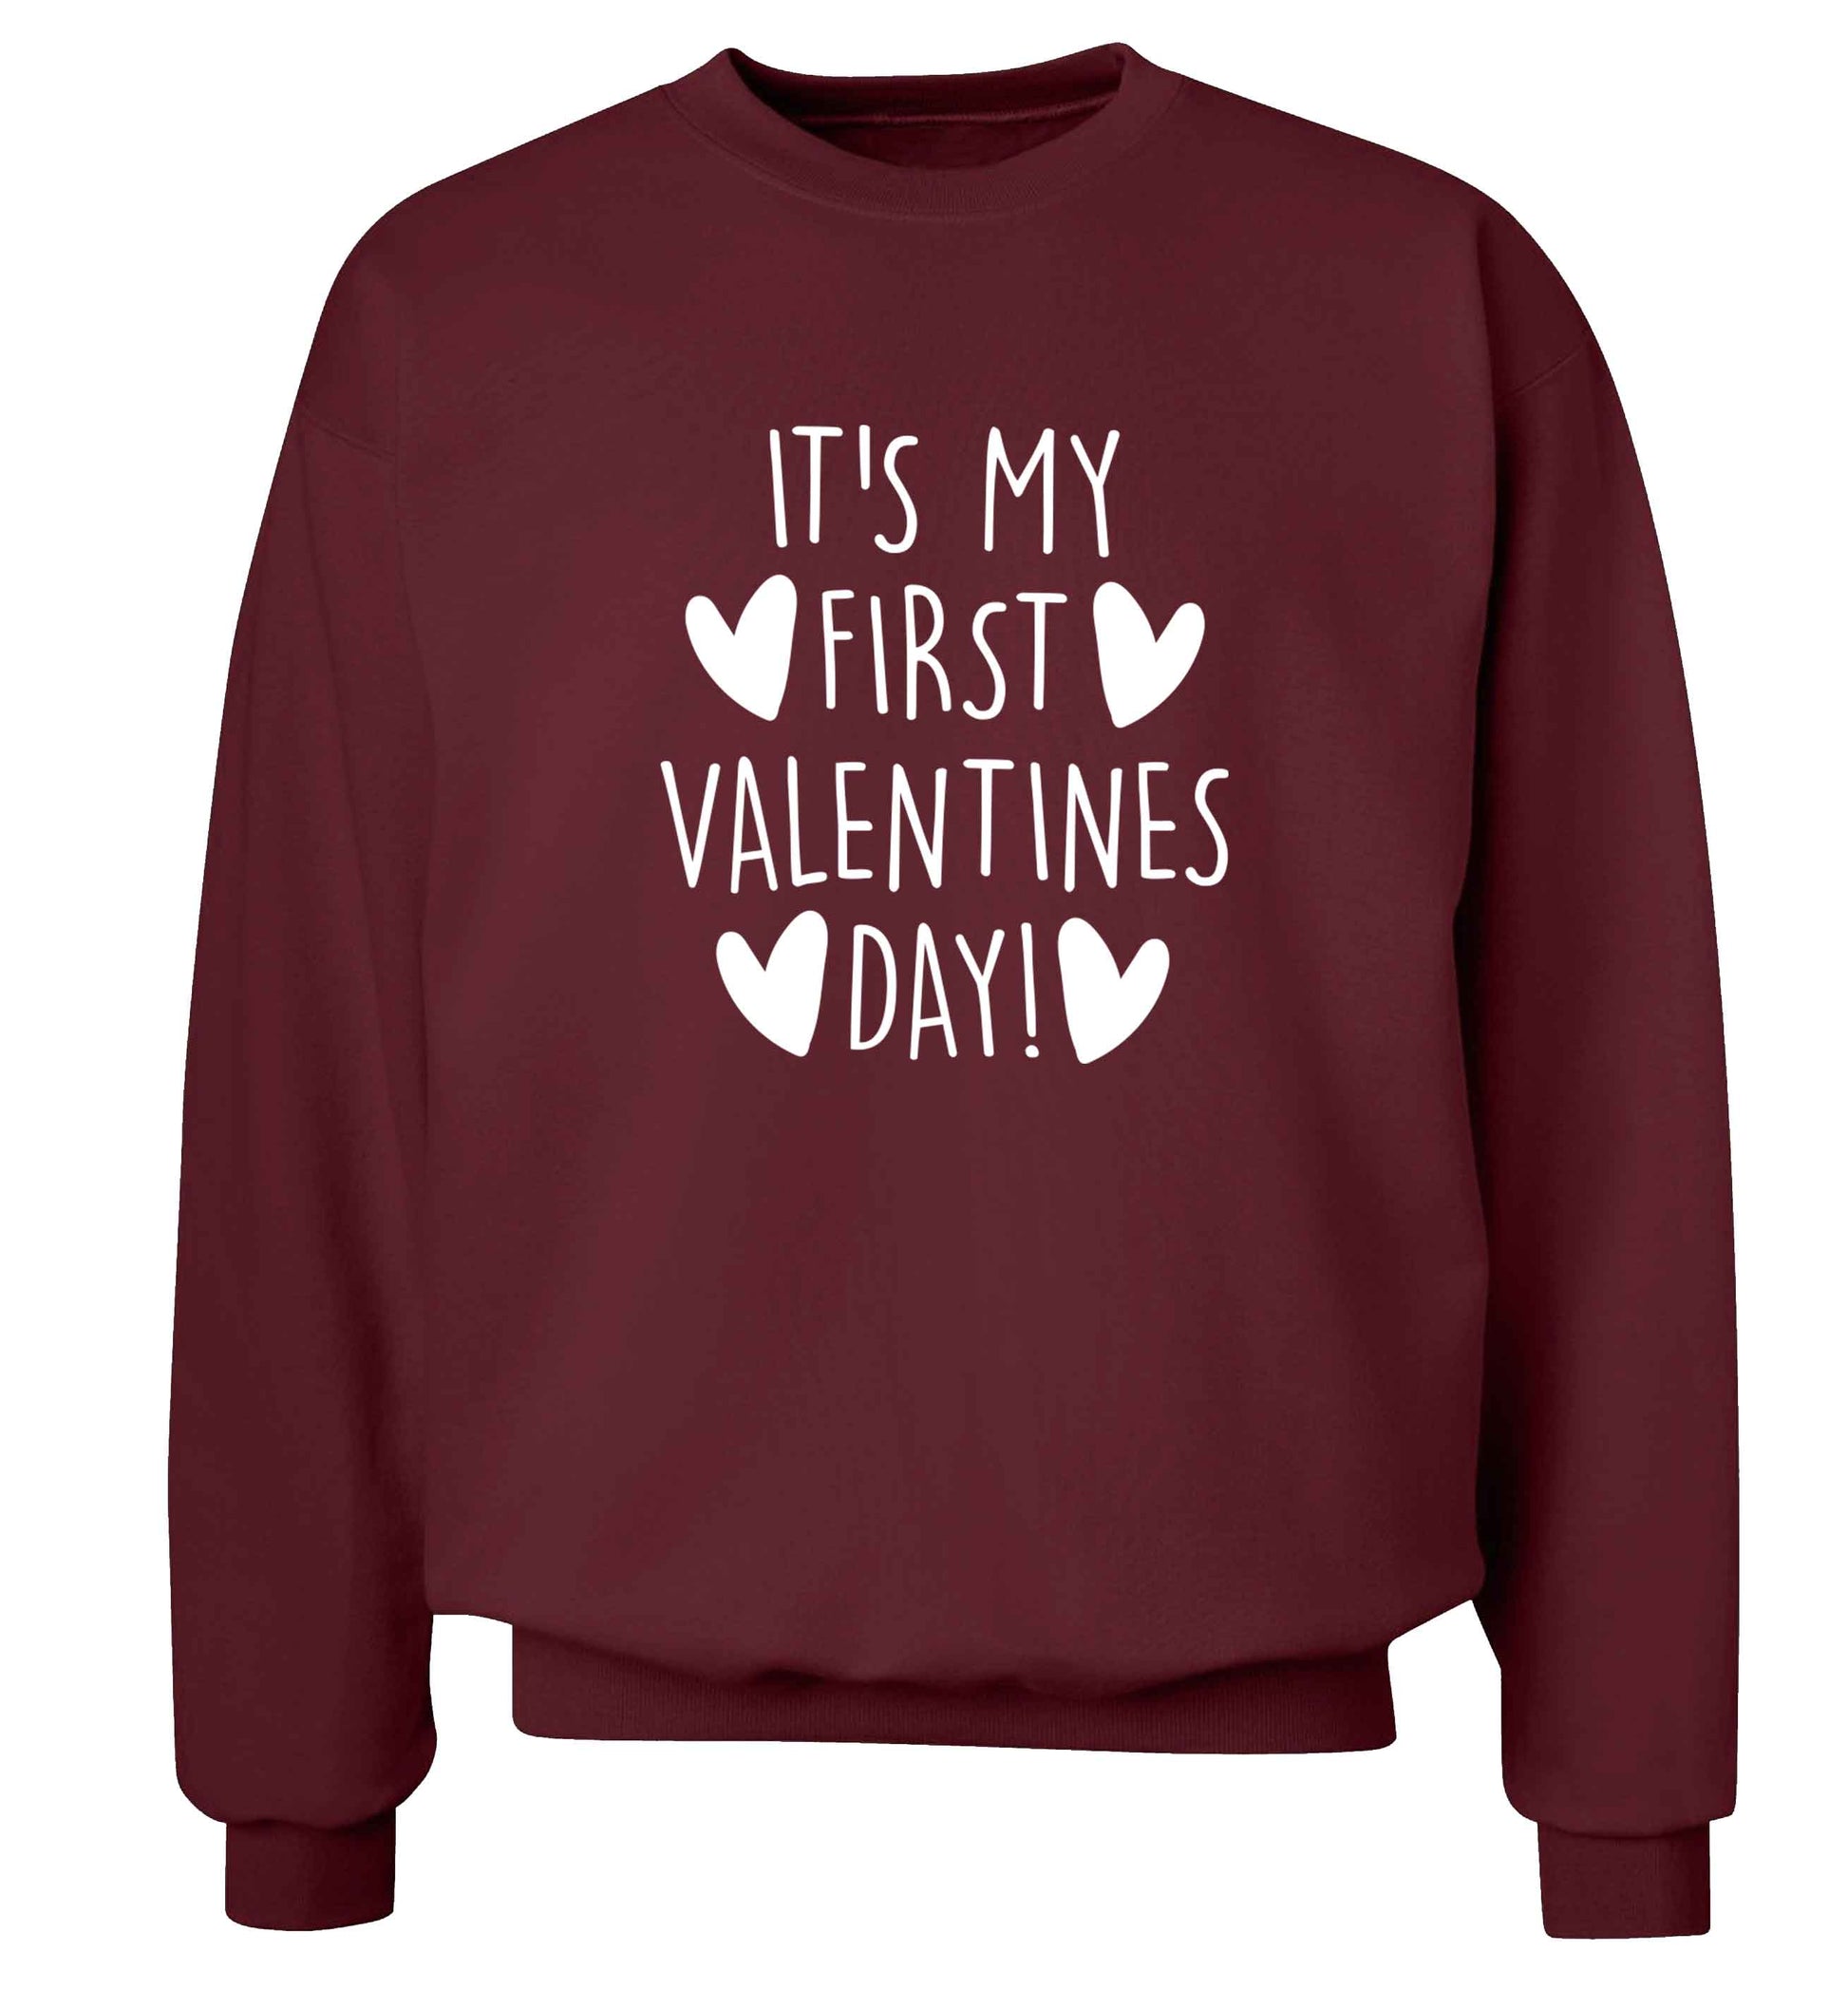 It's my first valentines day! adult's unisex maroon sweater 2XL